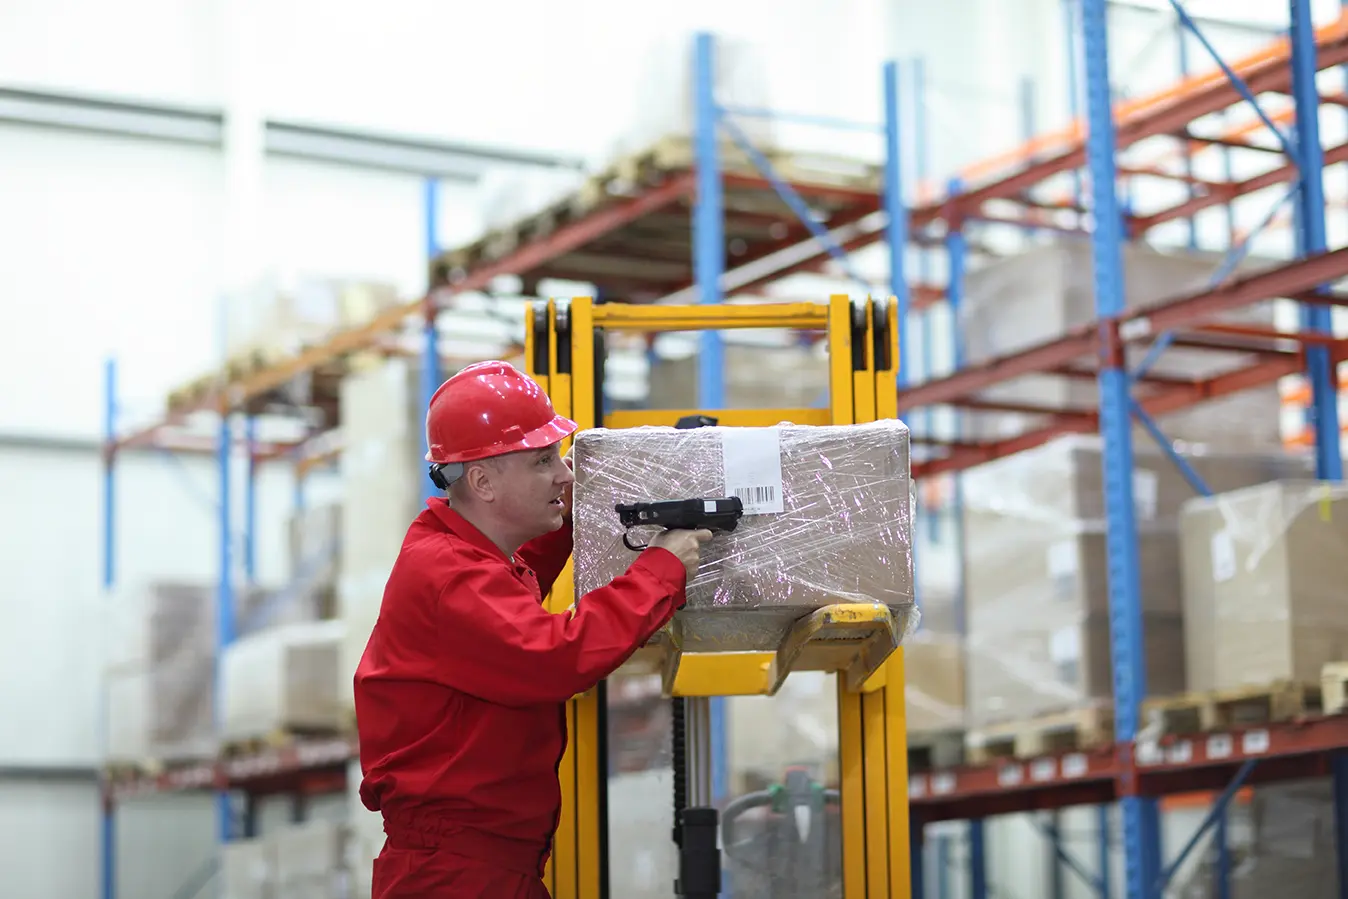 Ignoring basic safety protocols is one of the most common warehouse mistakes that can cost companies.